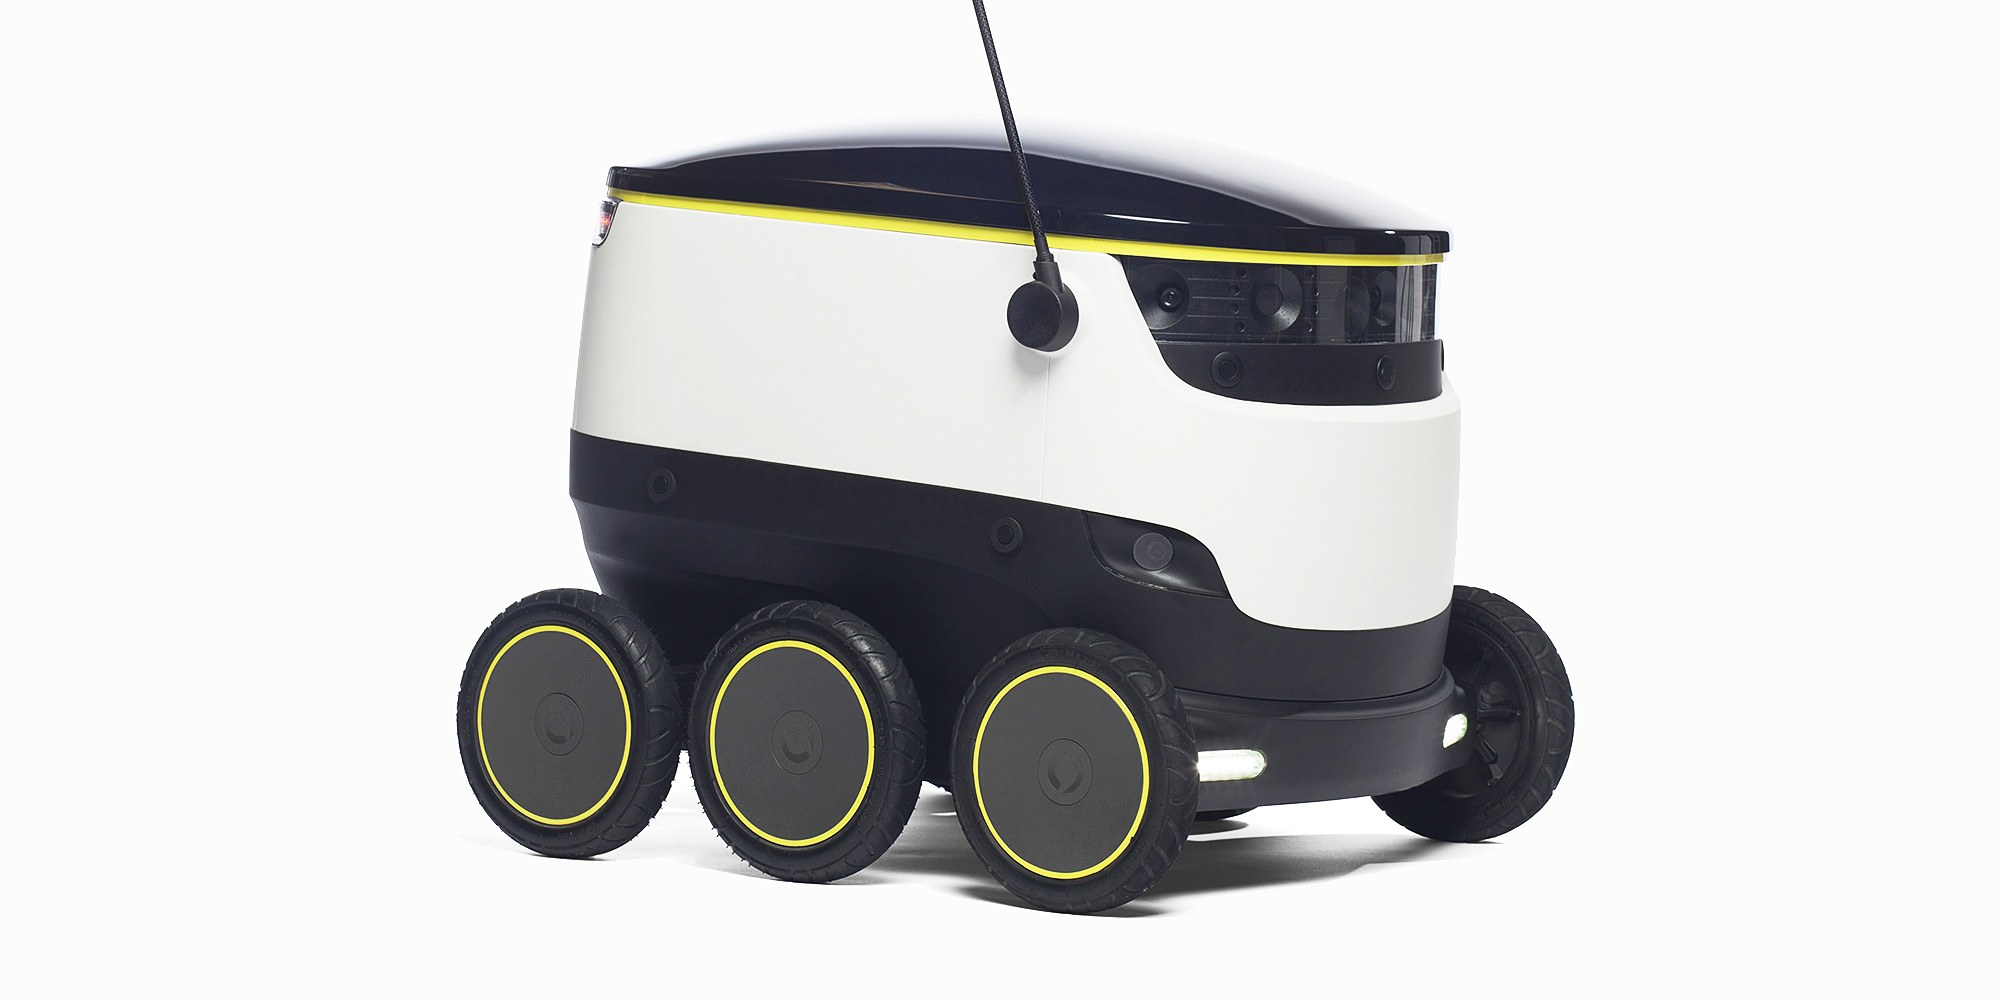 Delivery Robot Market 2019 - Industry Outlook and Growth by 2024